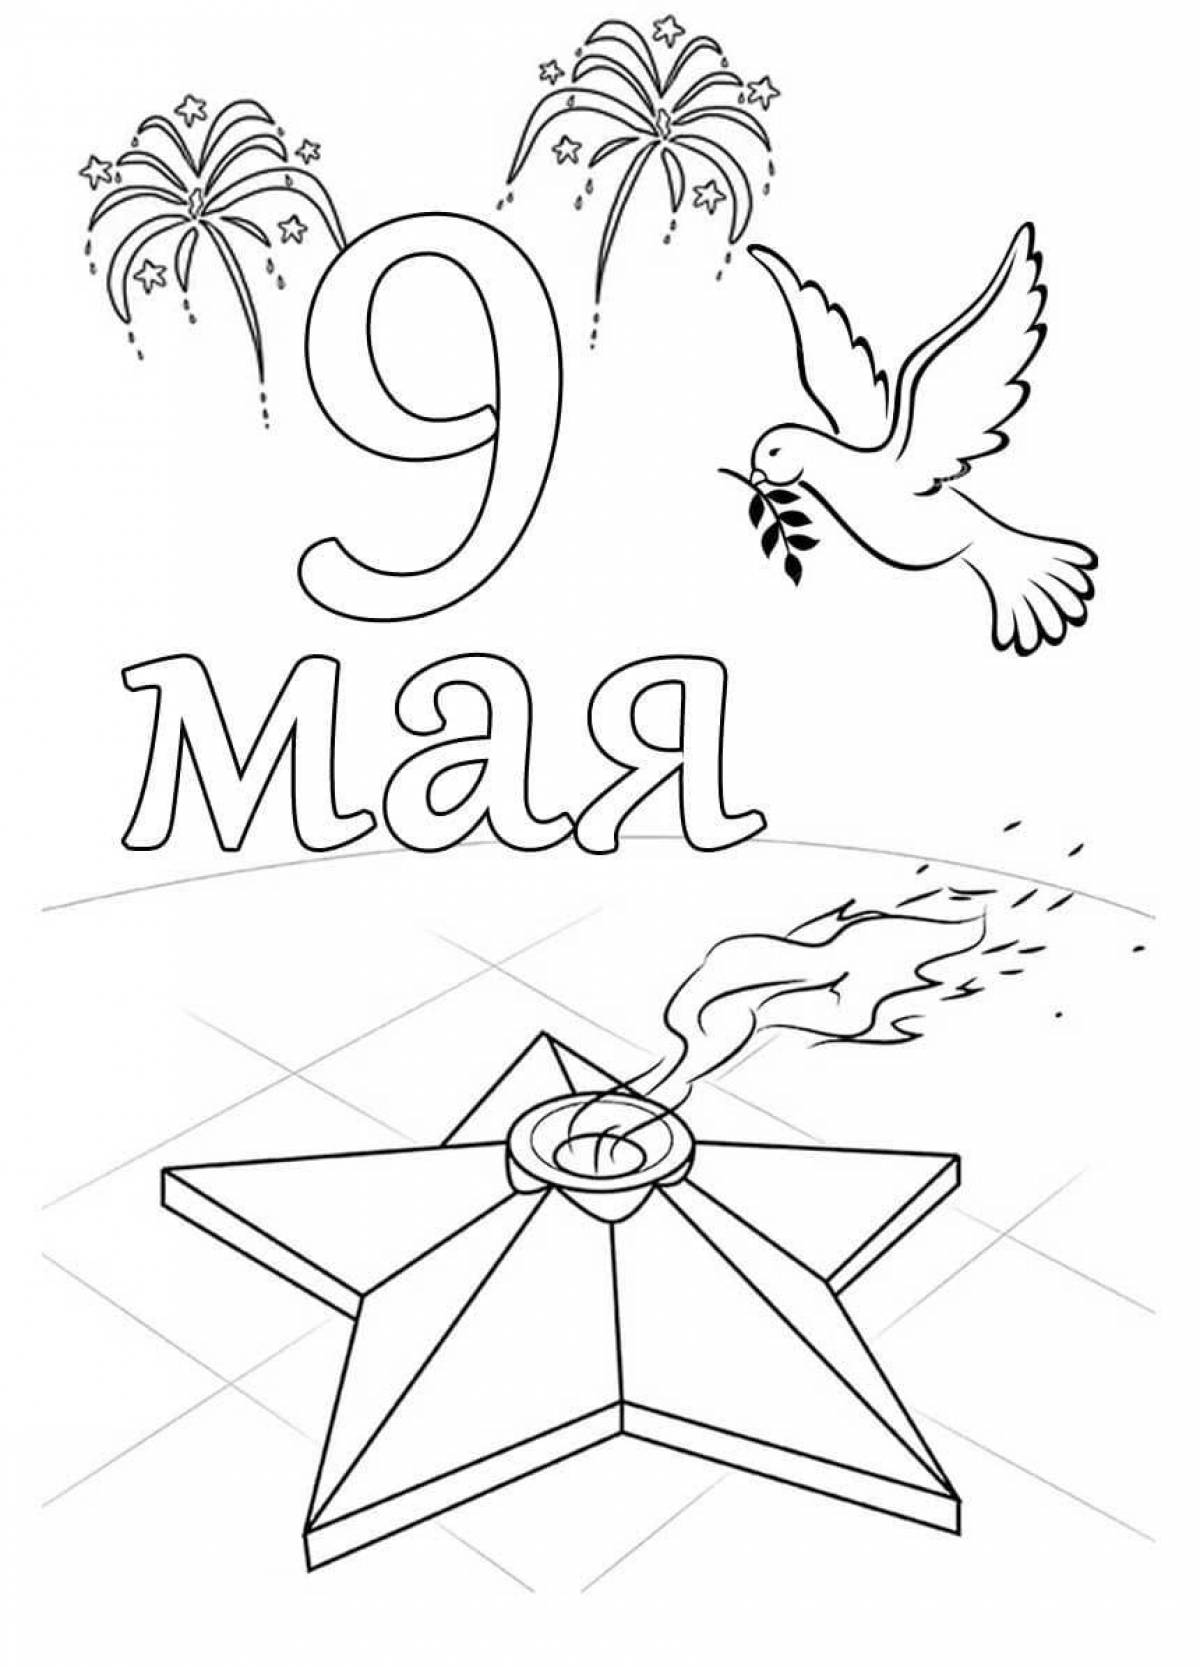 Coloring page stormy victory day